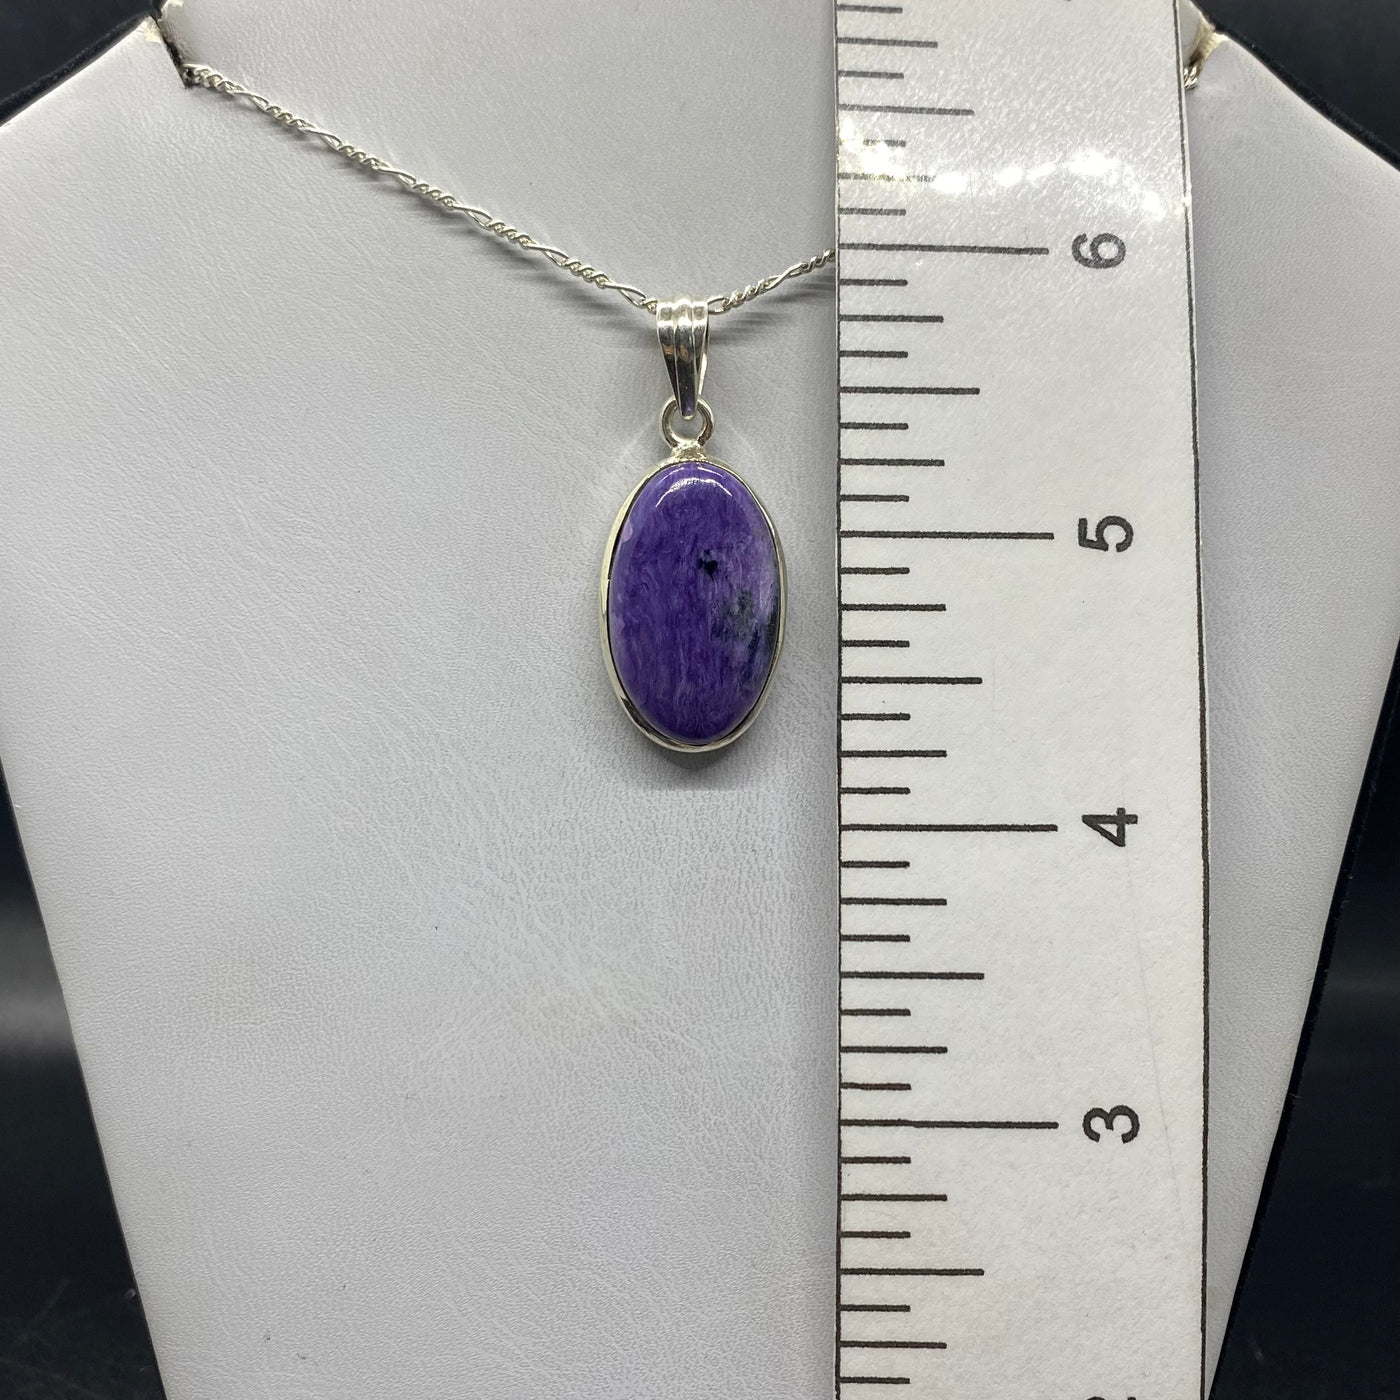 Charoite oval pendant SS  -GBP005